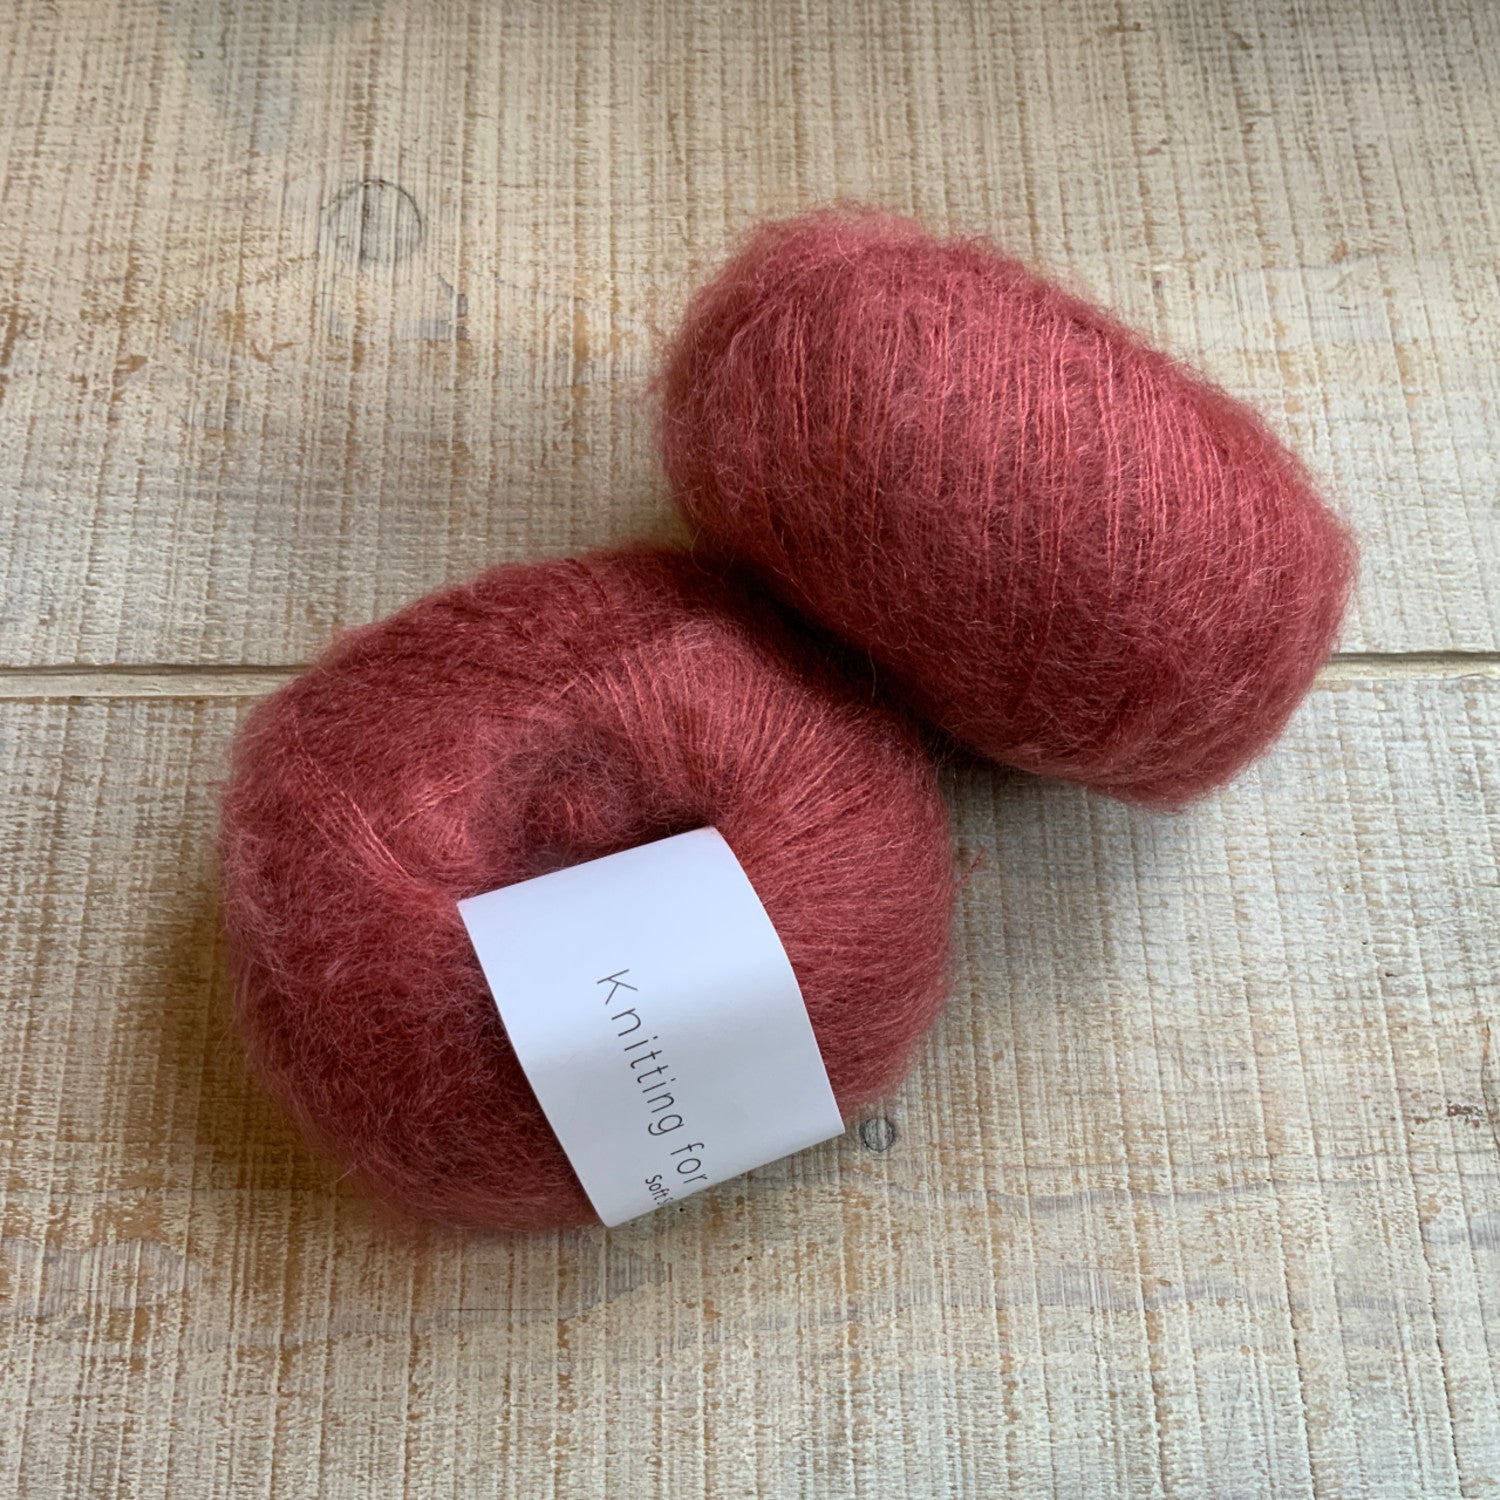 Knitting for Olive Soft Silk Mohair - Red Currant –